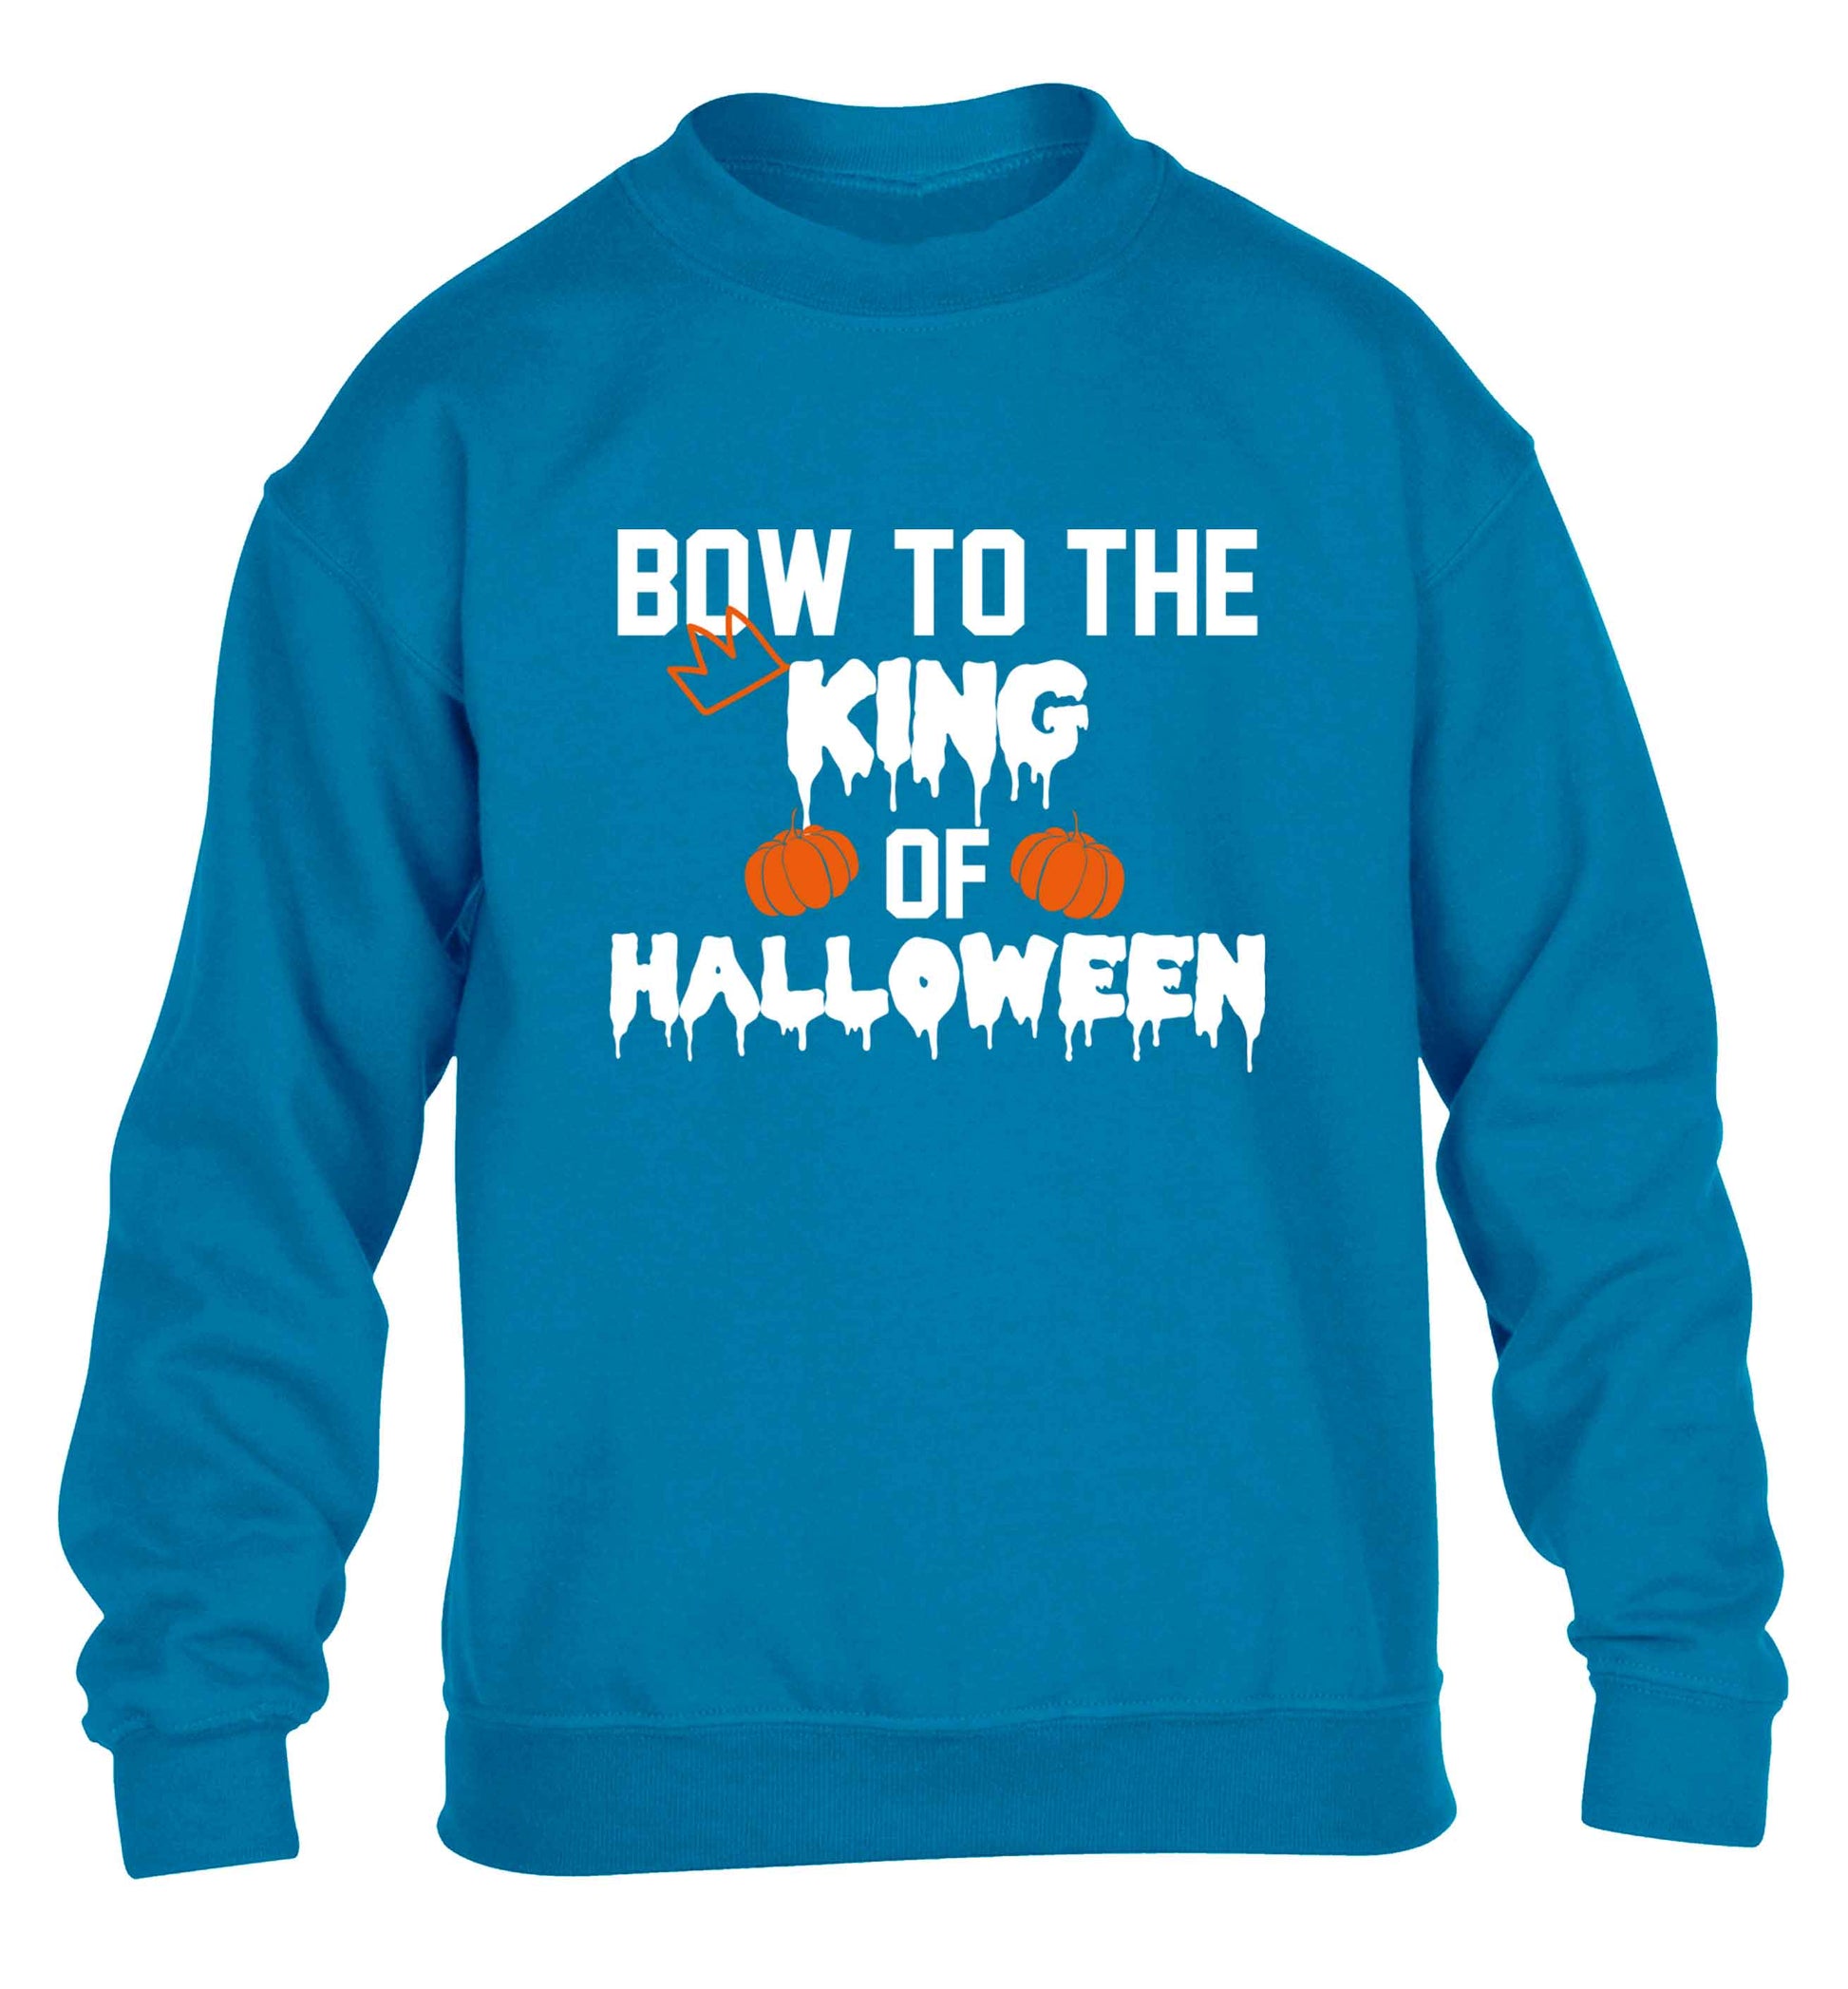 Bow to the King of halloween children's blue sweater 12-13 Years